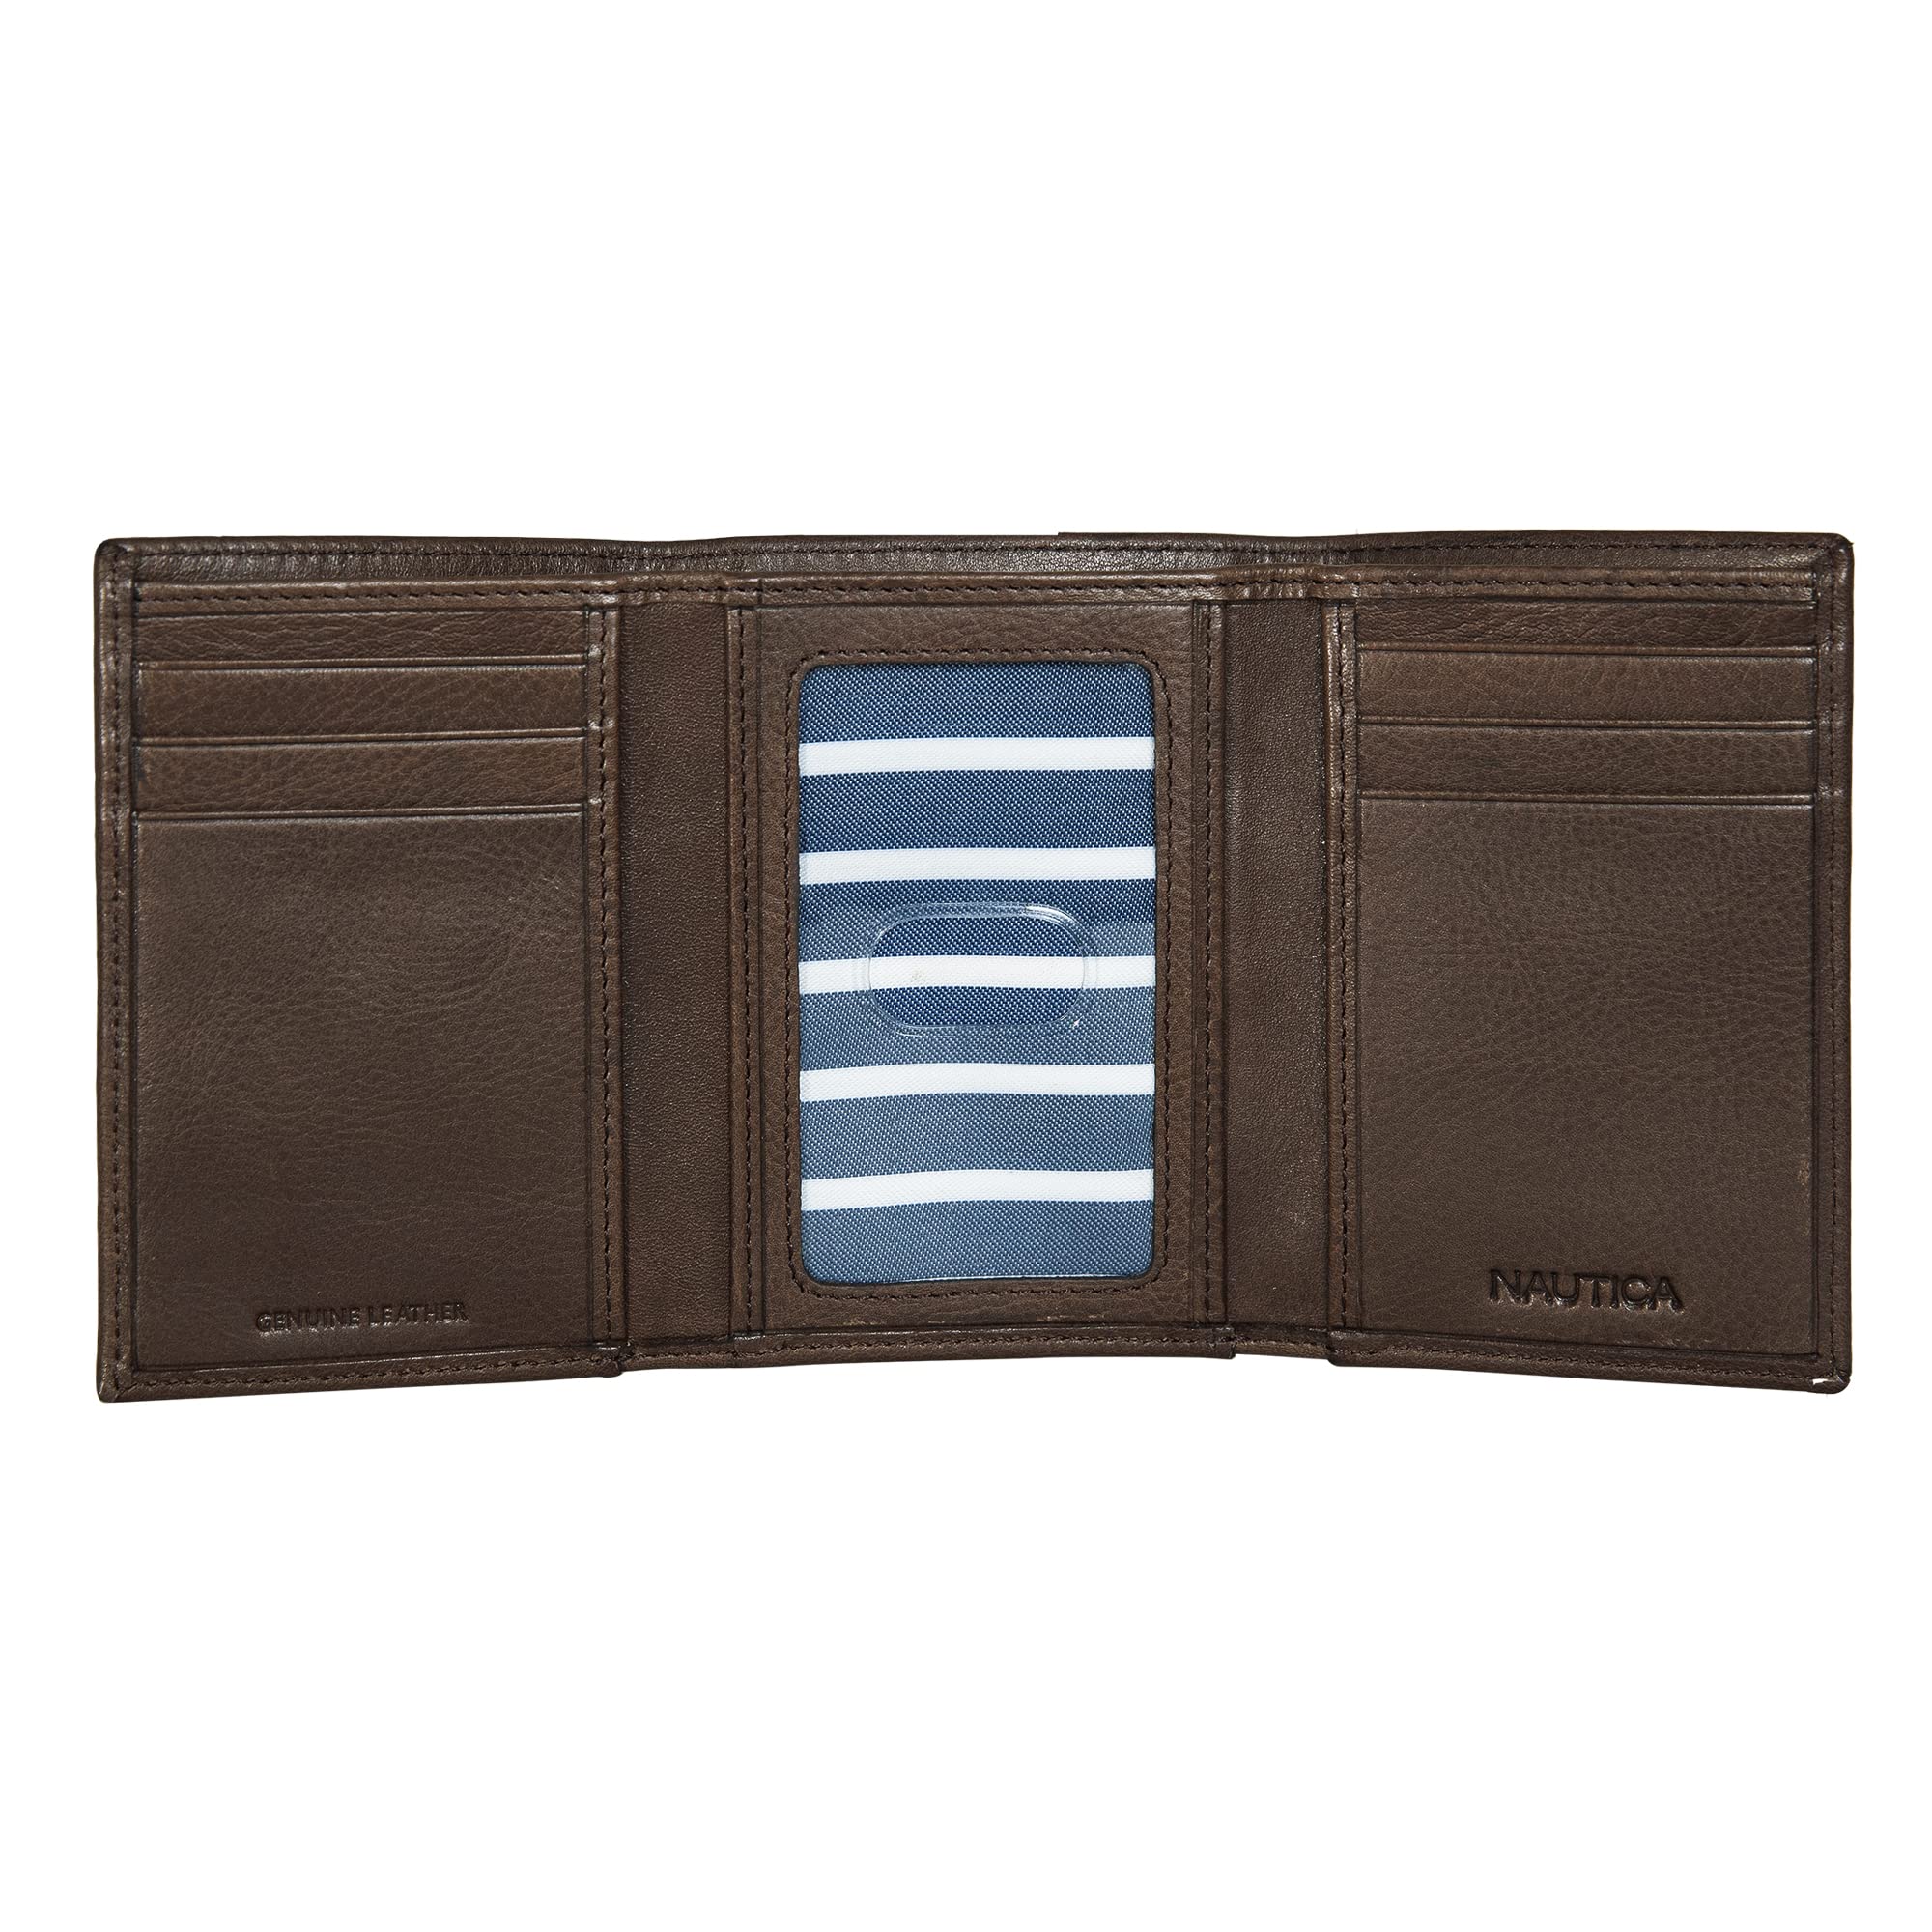 Nautica Men's Enameled Logo Tumbled Leather Trifold Wallet with RFID Protection-Brown, One Size